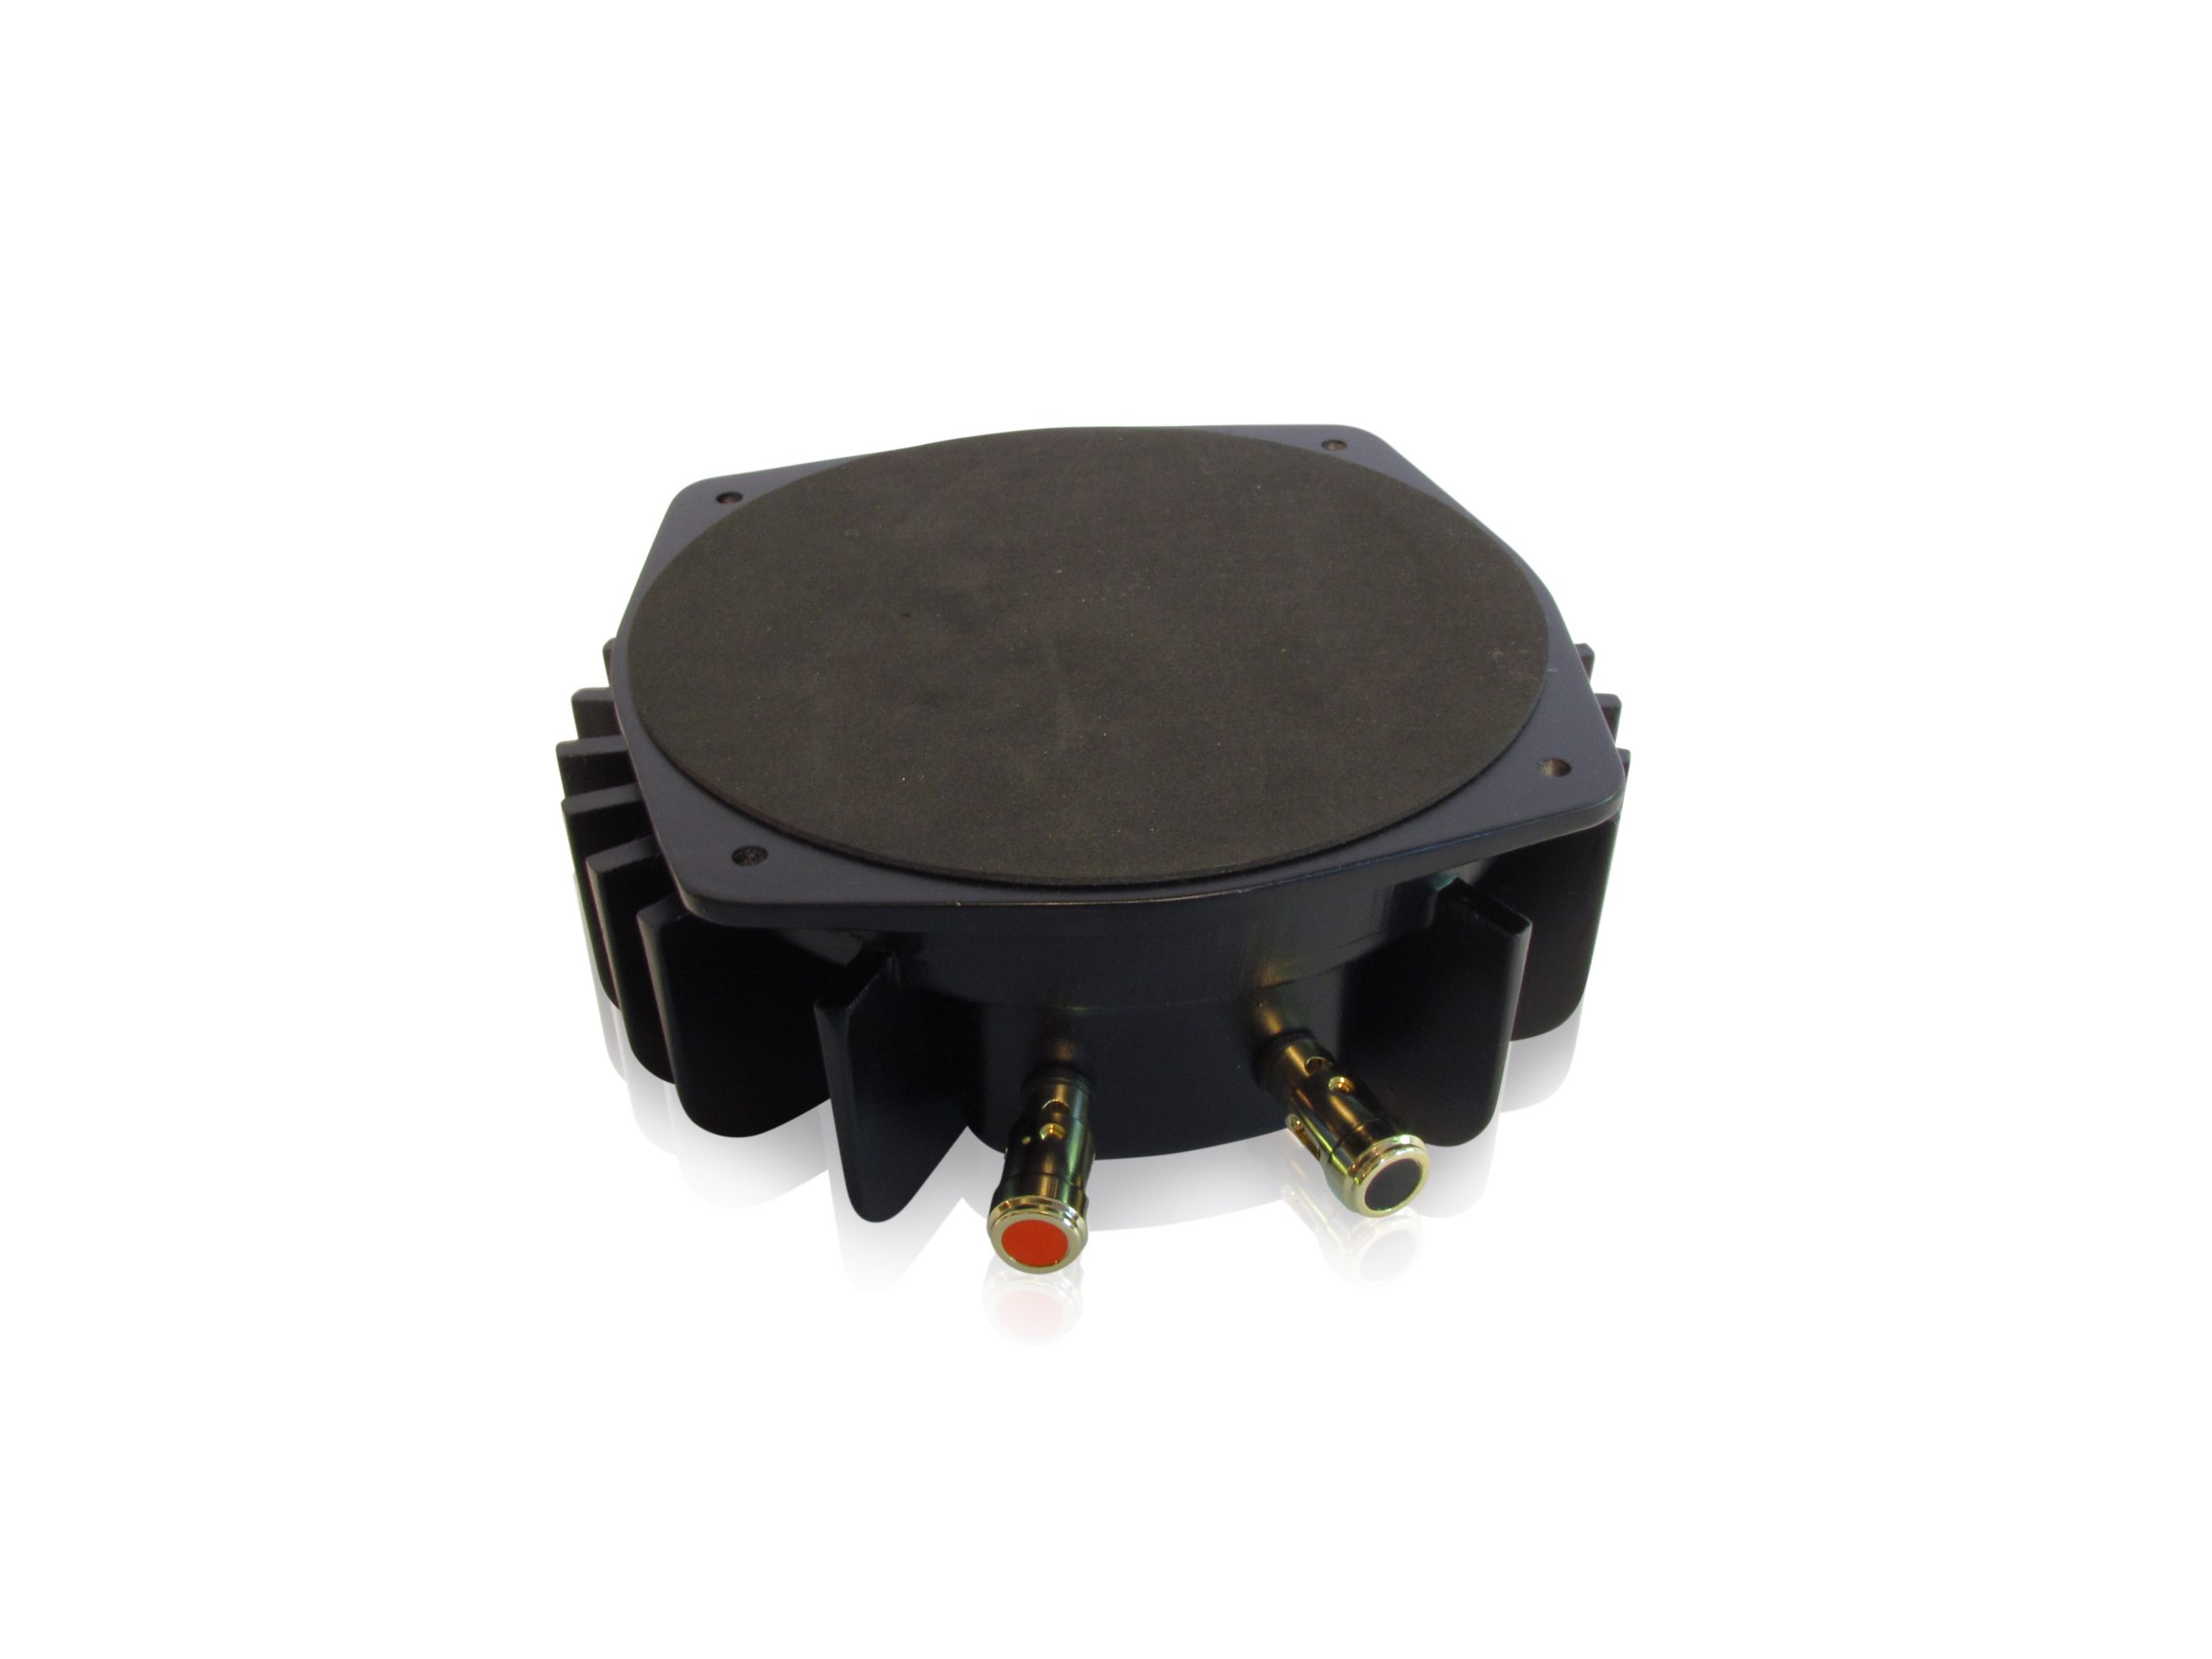 AST-2B-4 Pro Bass Shaker Tactile Transducer 100W for DIY home theater car